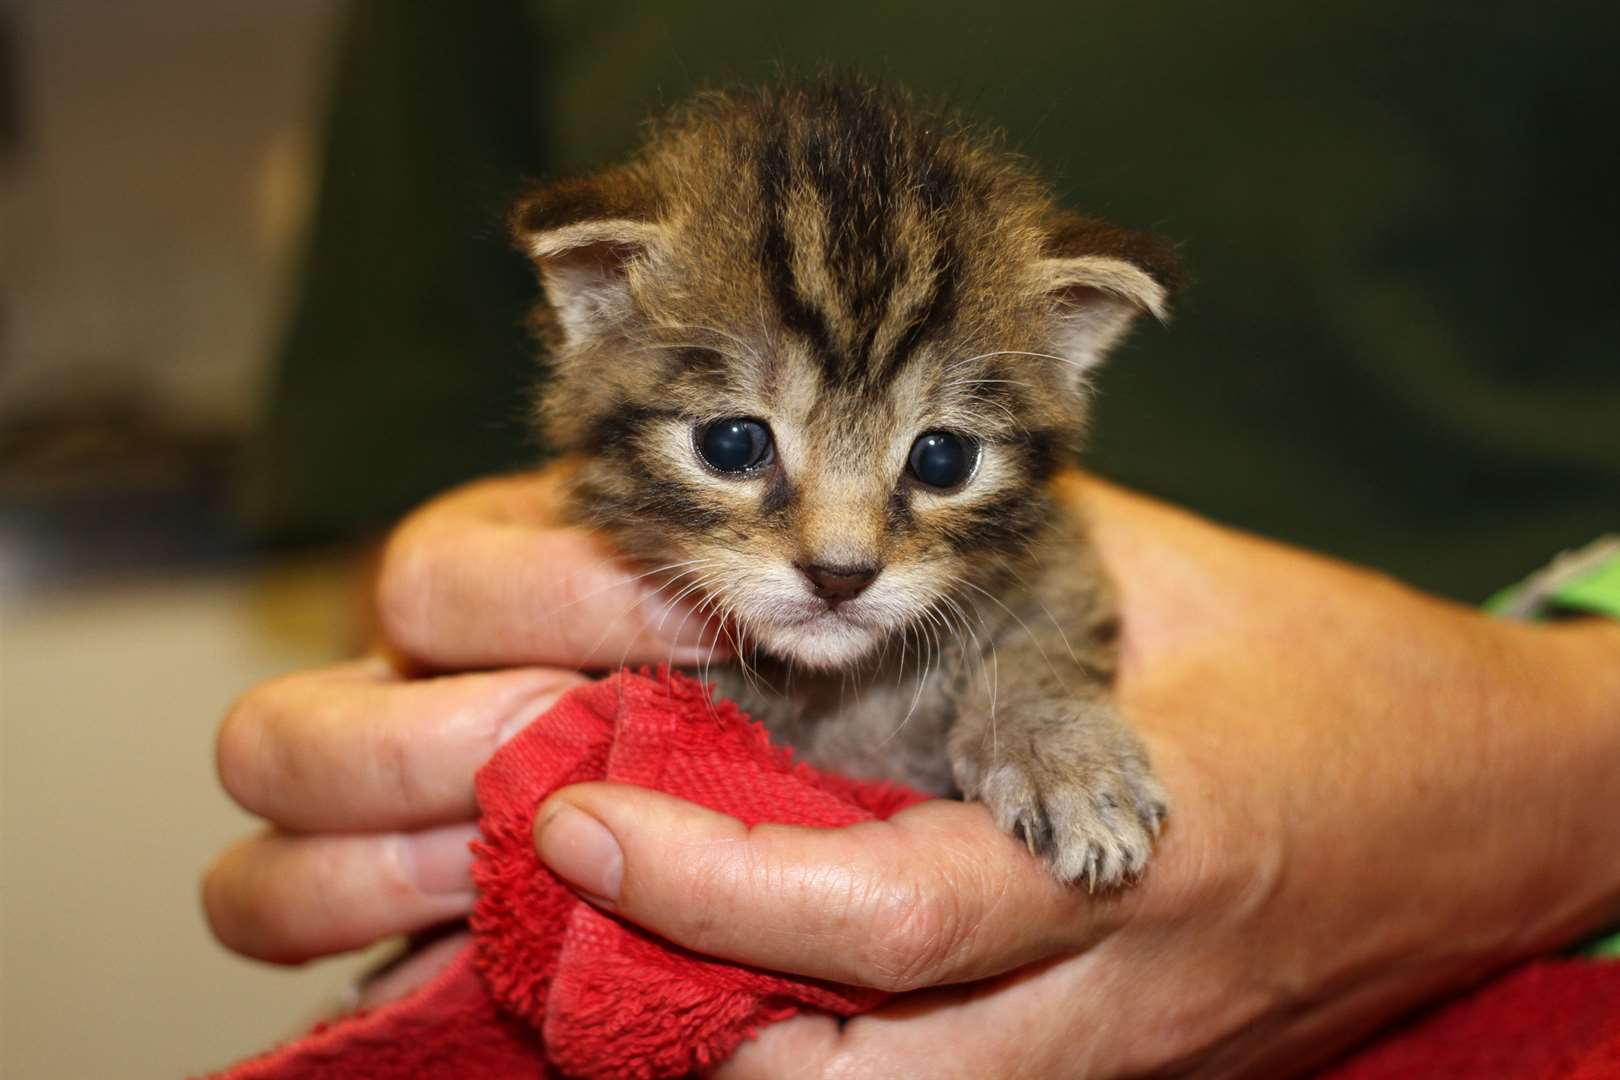 The new wildcat kitten being hand-reared at Wildwood, near Herne.